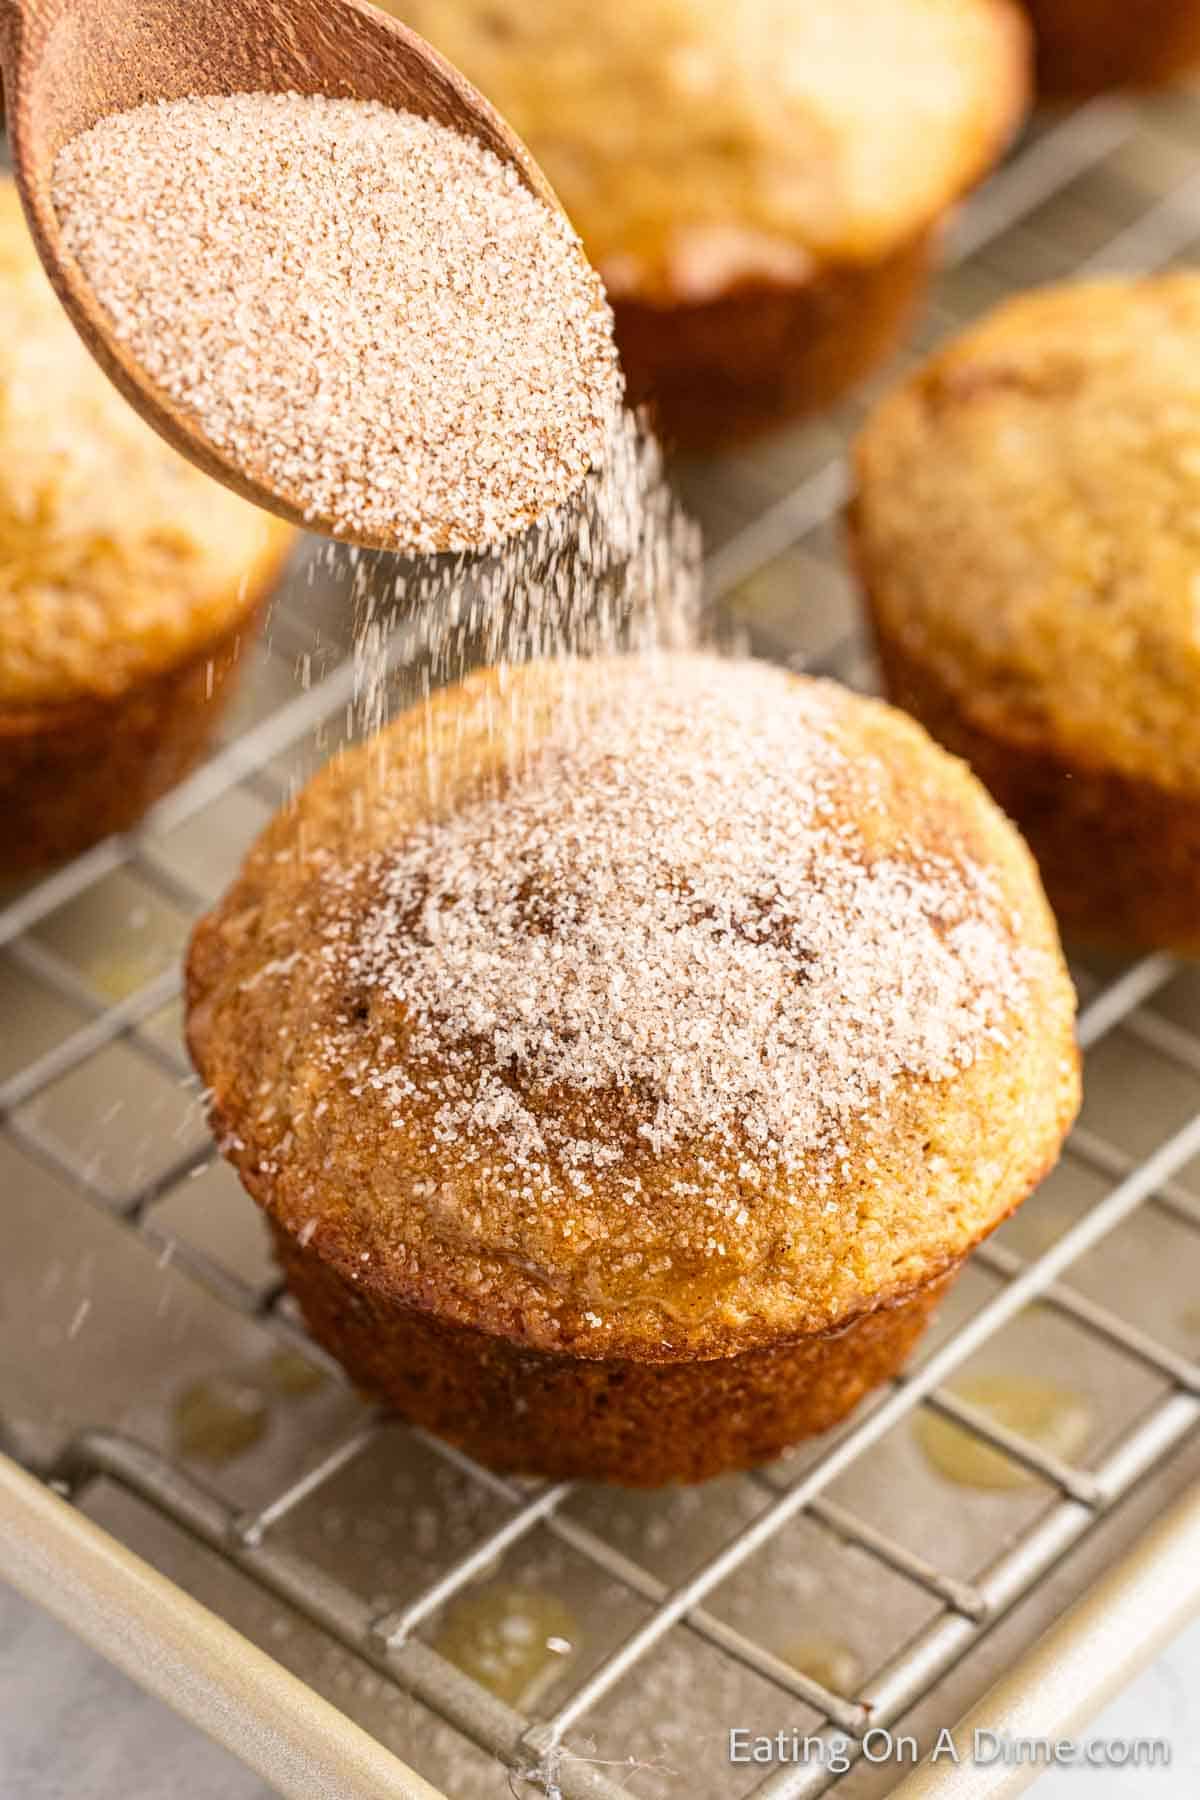 Sprinkle cinnamon sugar mixture over the muffins on a wire rack